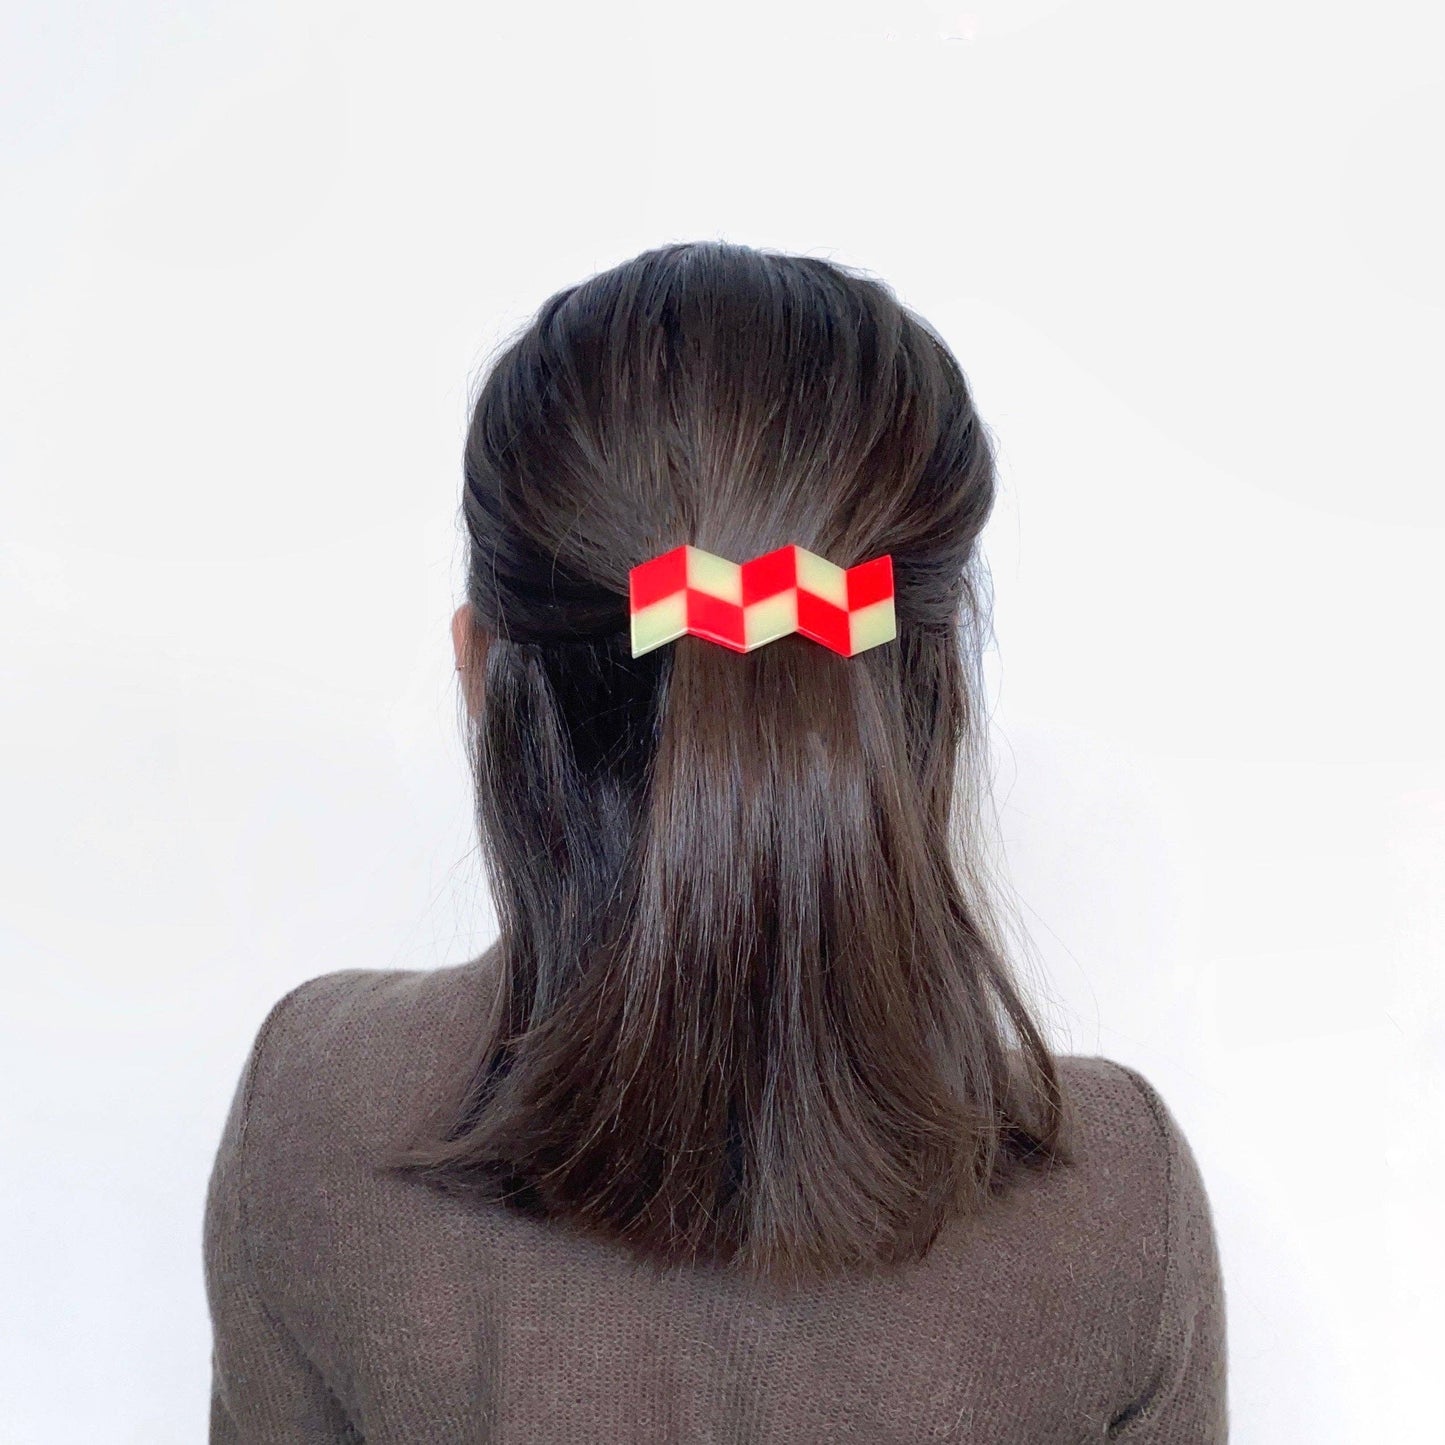 CHUNKS - Zigzag Barrette in Yellow + Punch